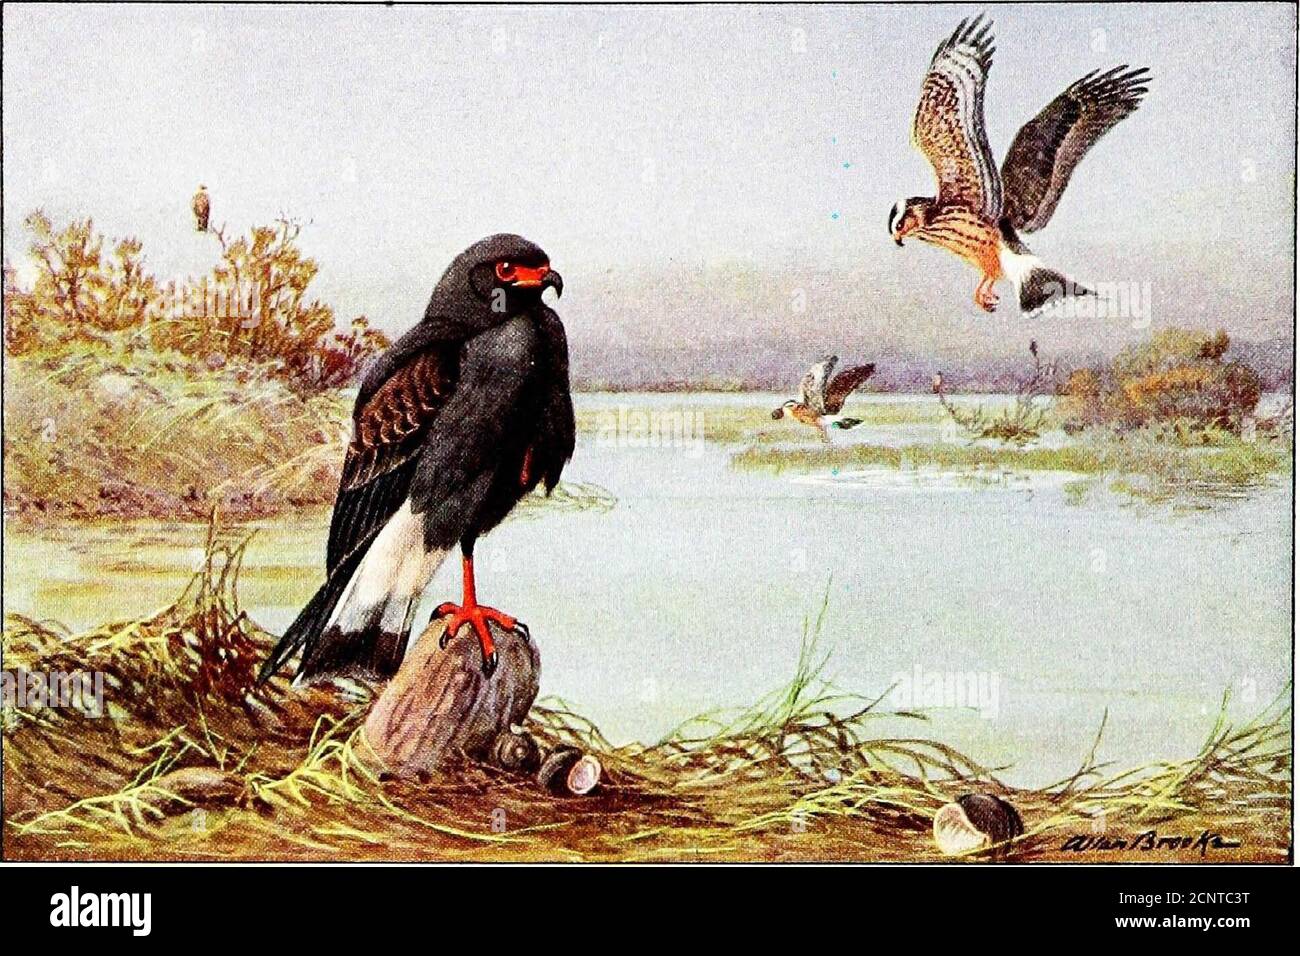 . Falconry, the sport of kings . ) National Geographic Society Approximately oiic-cighth natural size SWALLOW-TAILED KITEPerched and flying adults, aboveWHITE-TAILED KITE MISSISSIPPI KITE On ground at left Perched at right and flying in distance III THE NATIONAL GEOGRAPHIC MAGAZINE. Stock Photo